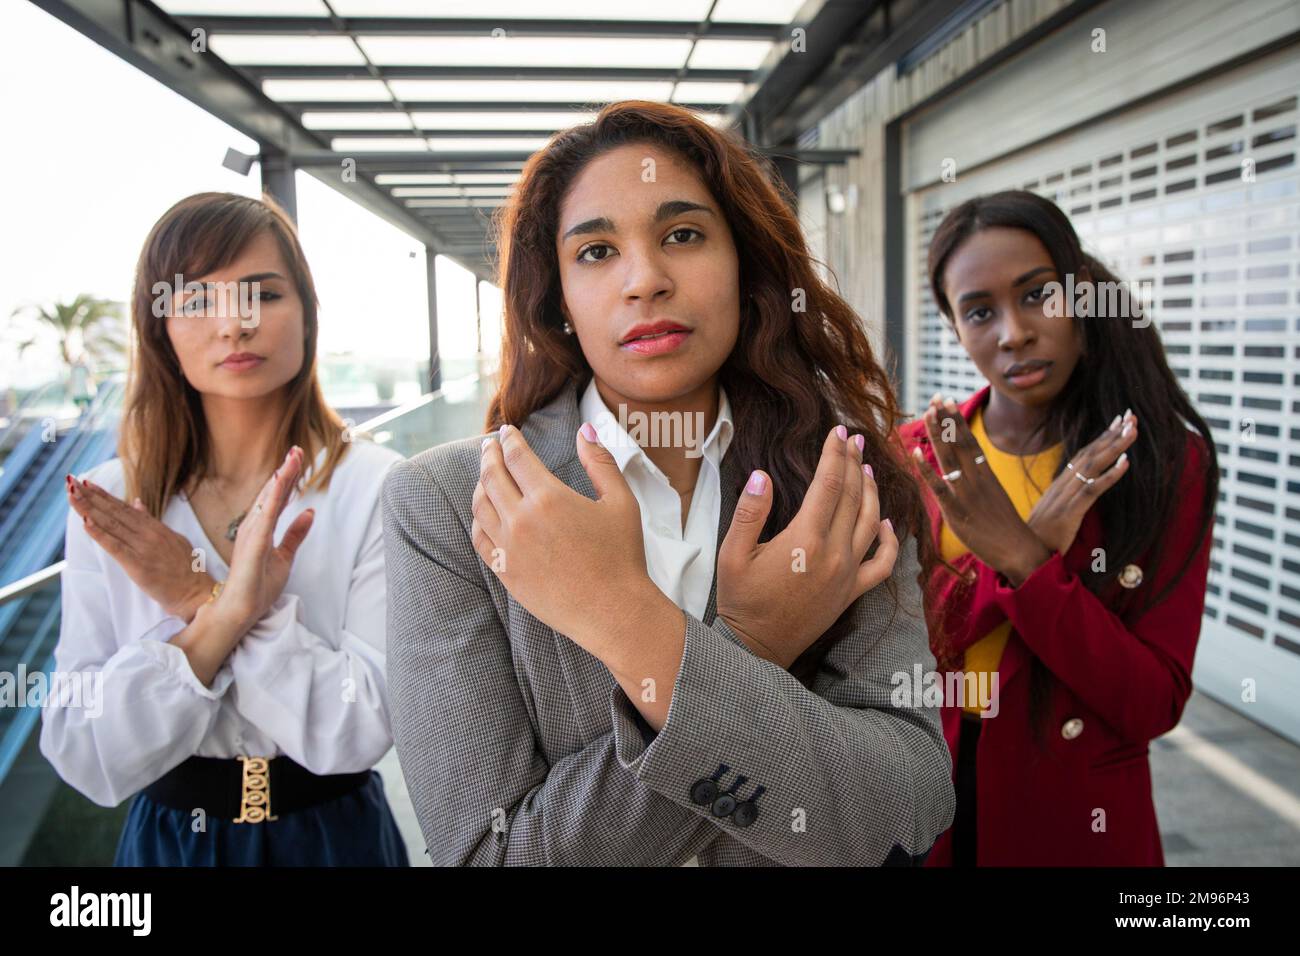 Three women with their arms crossed Break The Bias movement in support of International Women's Day Stock Photo